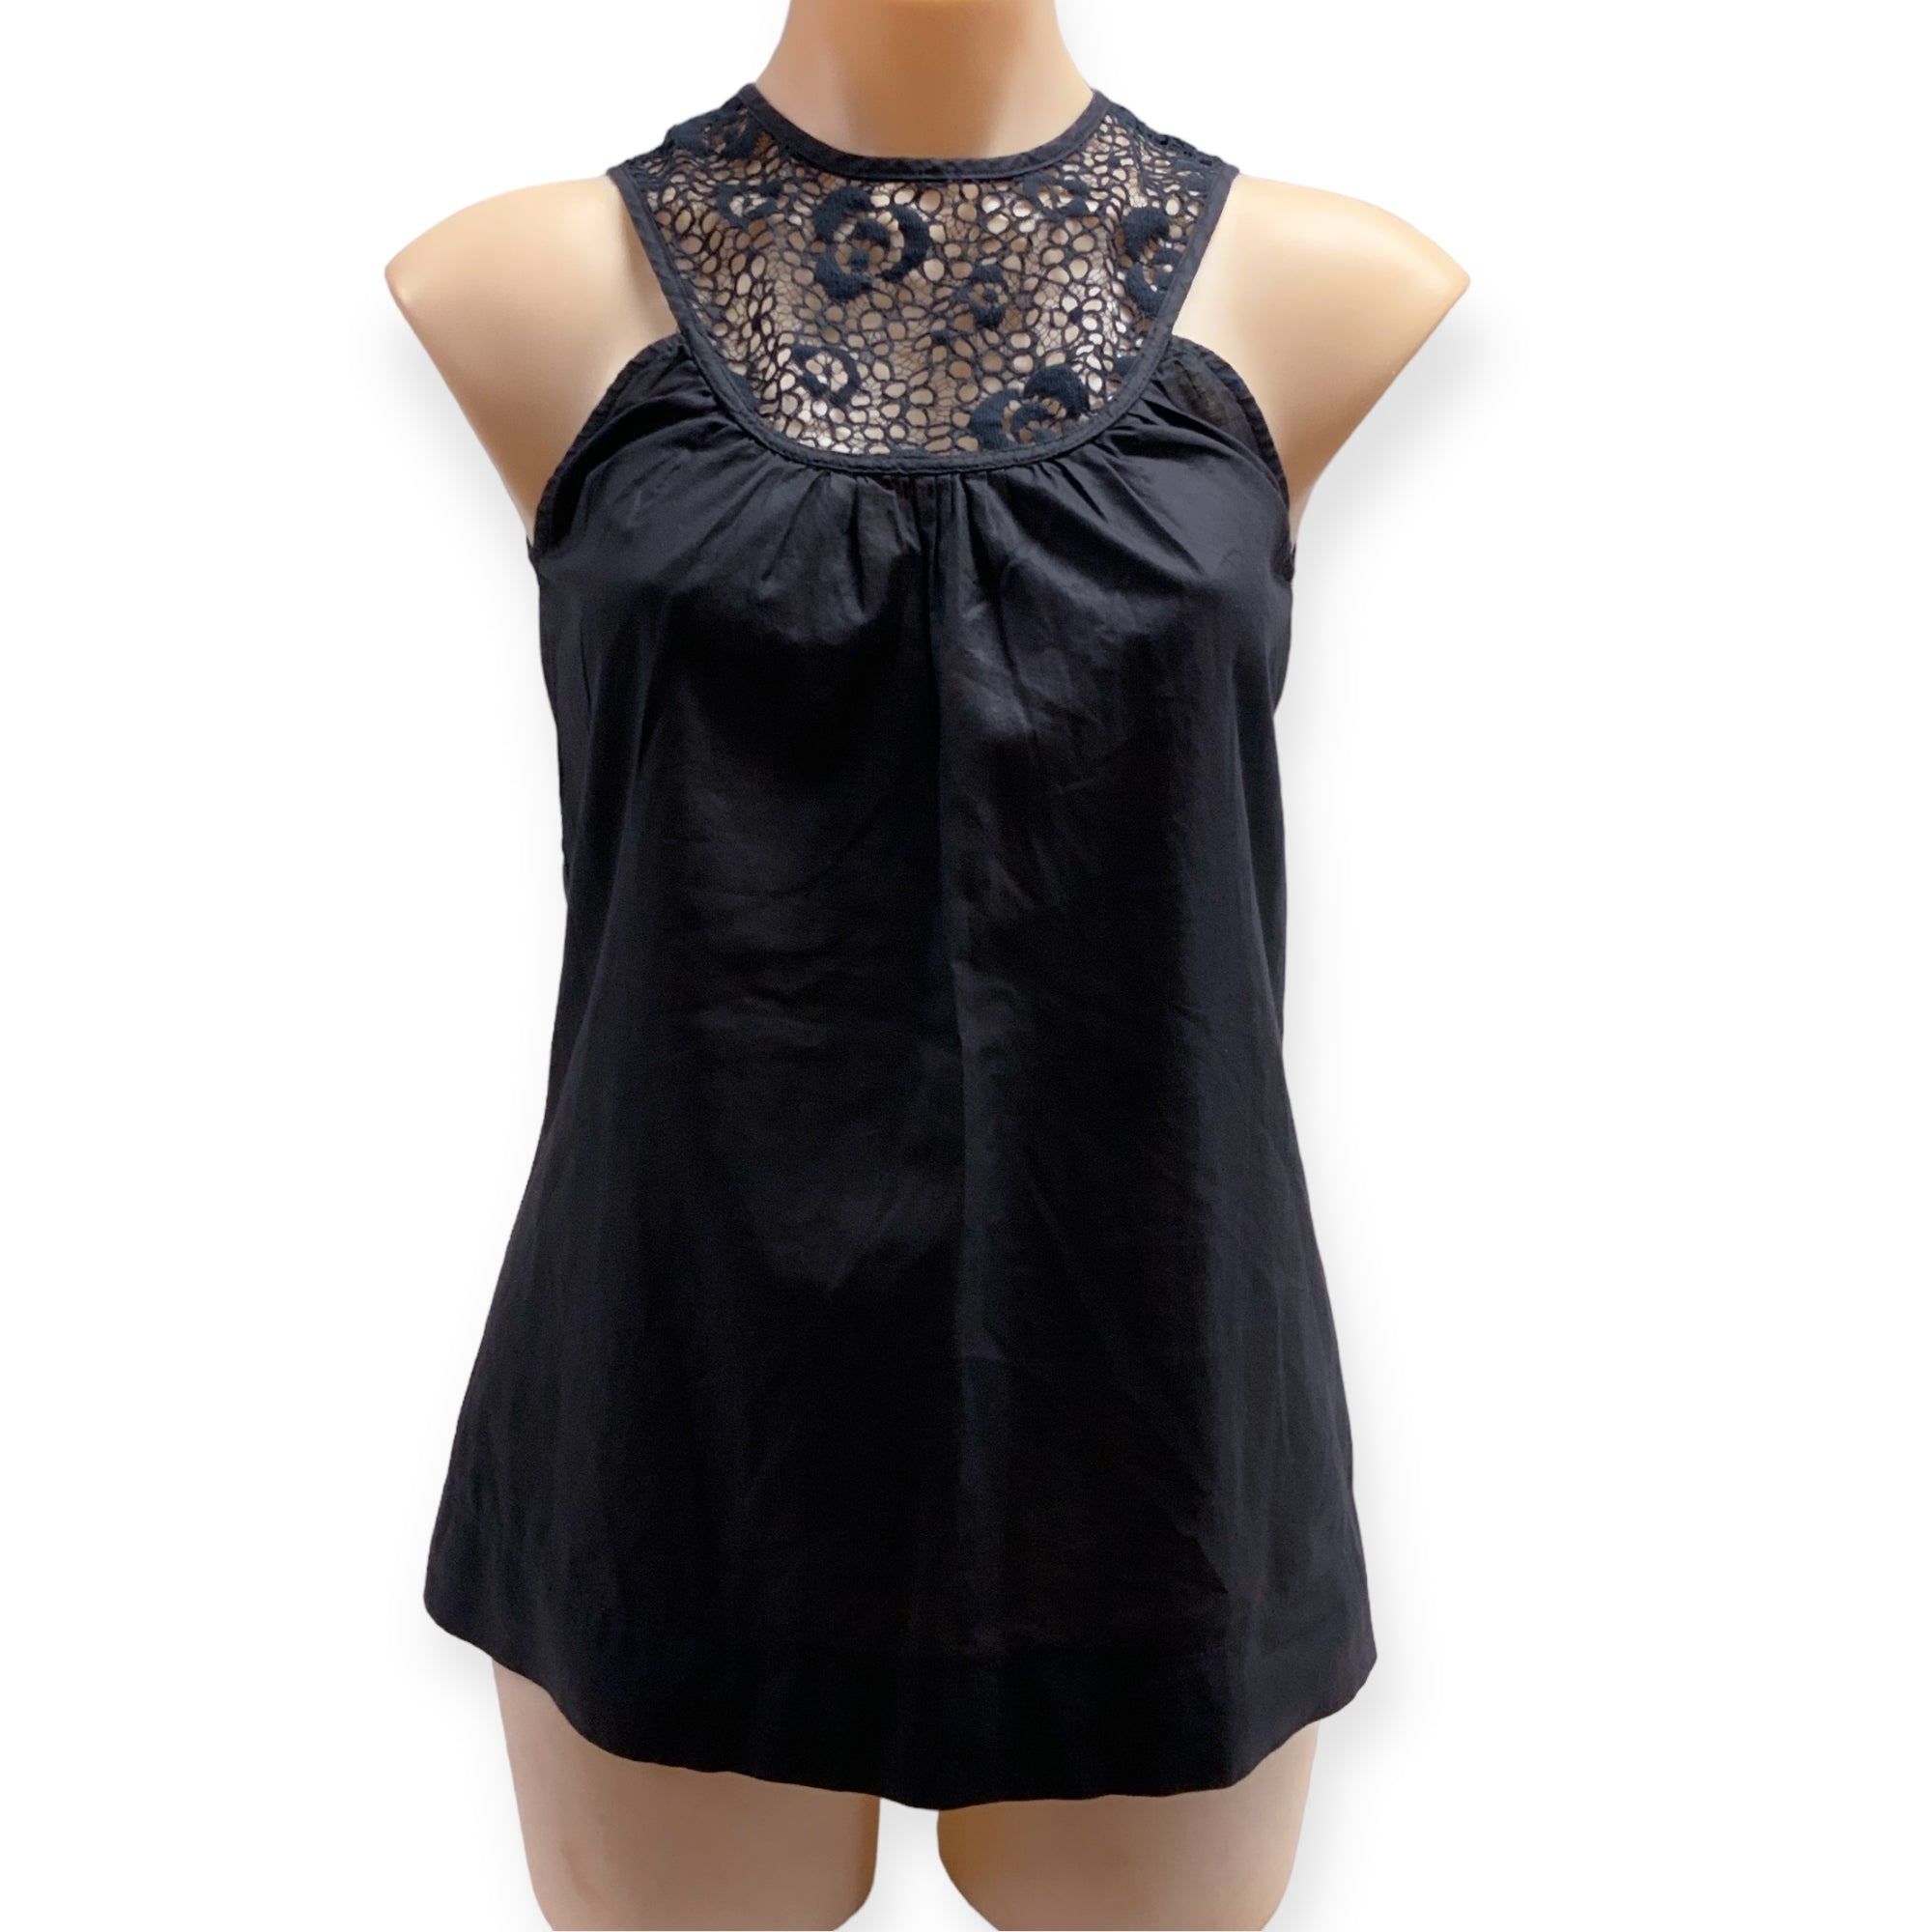 REVIEW Ladies Black Halter Style Lace Trim Sleeveless Top - Size 6